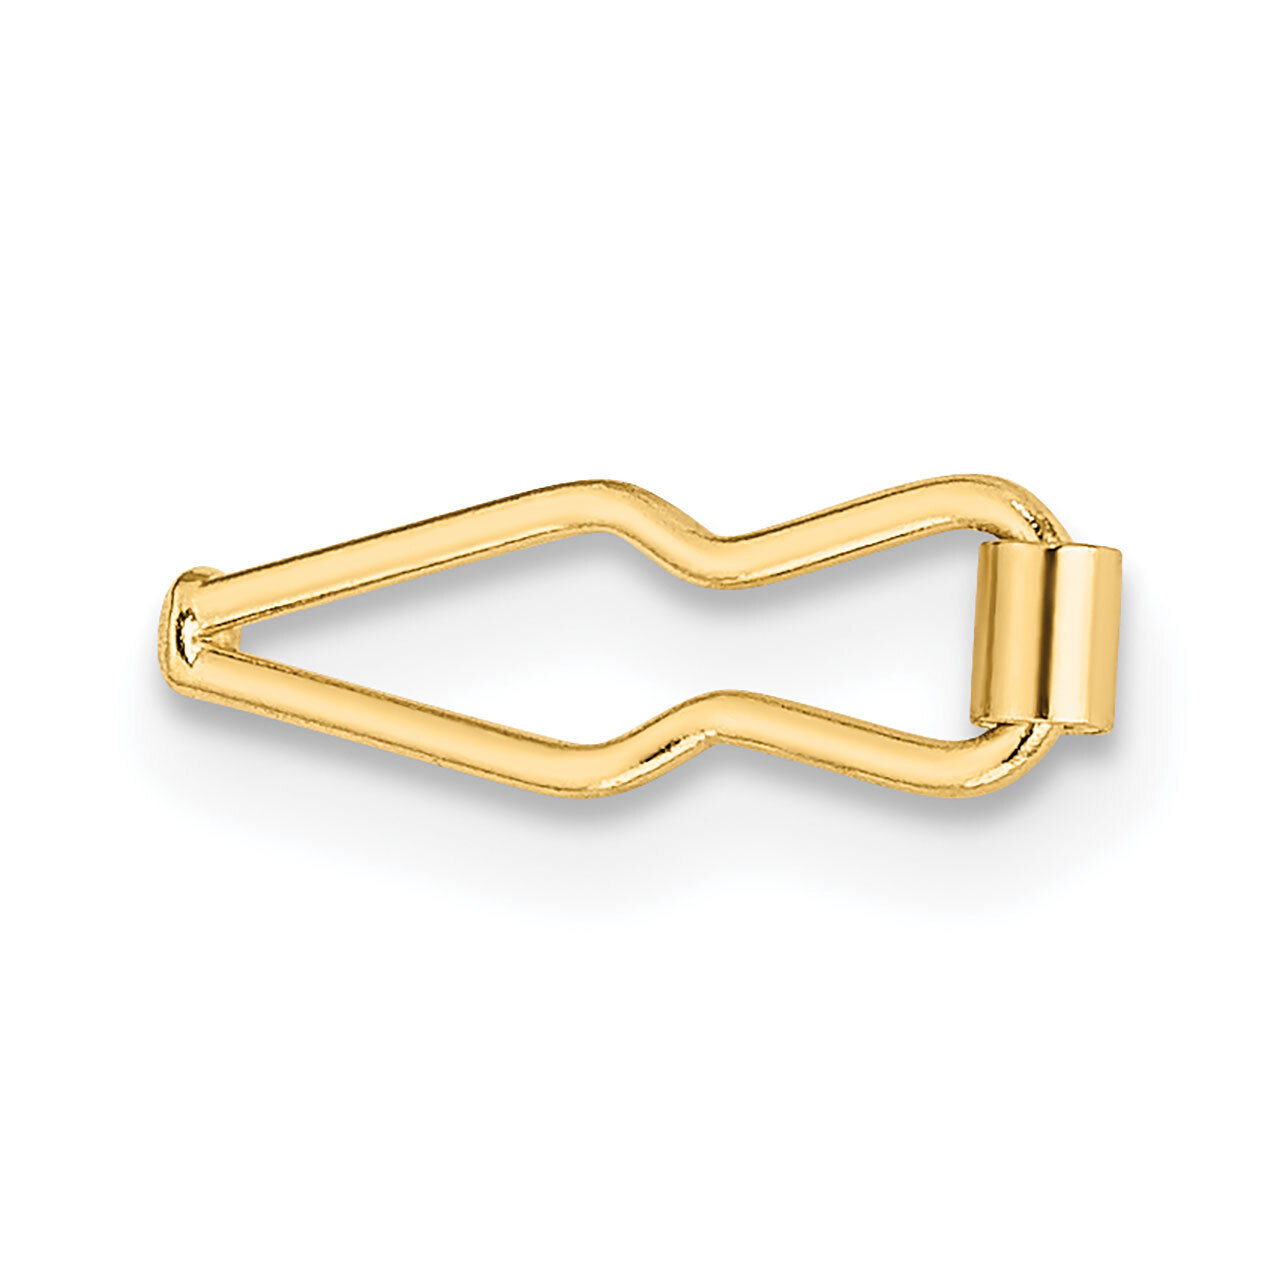 Safety Figure 8 Clasp 14k Yellow Gold YG1893